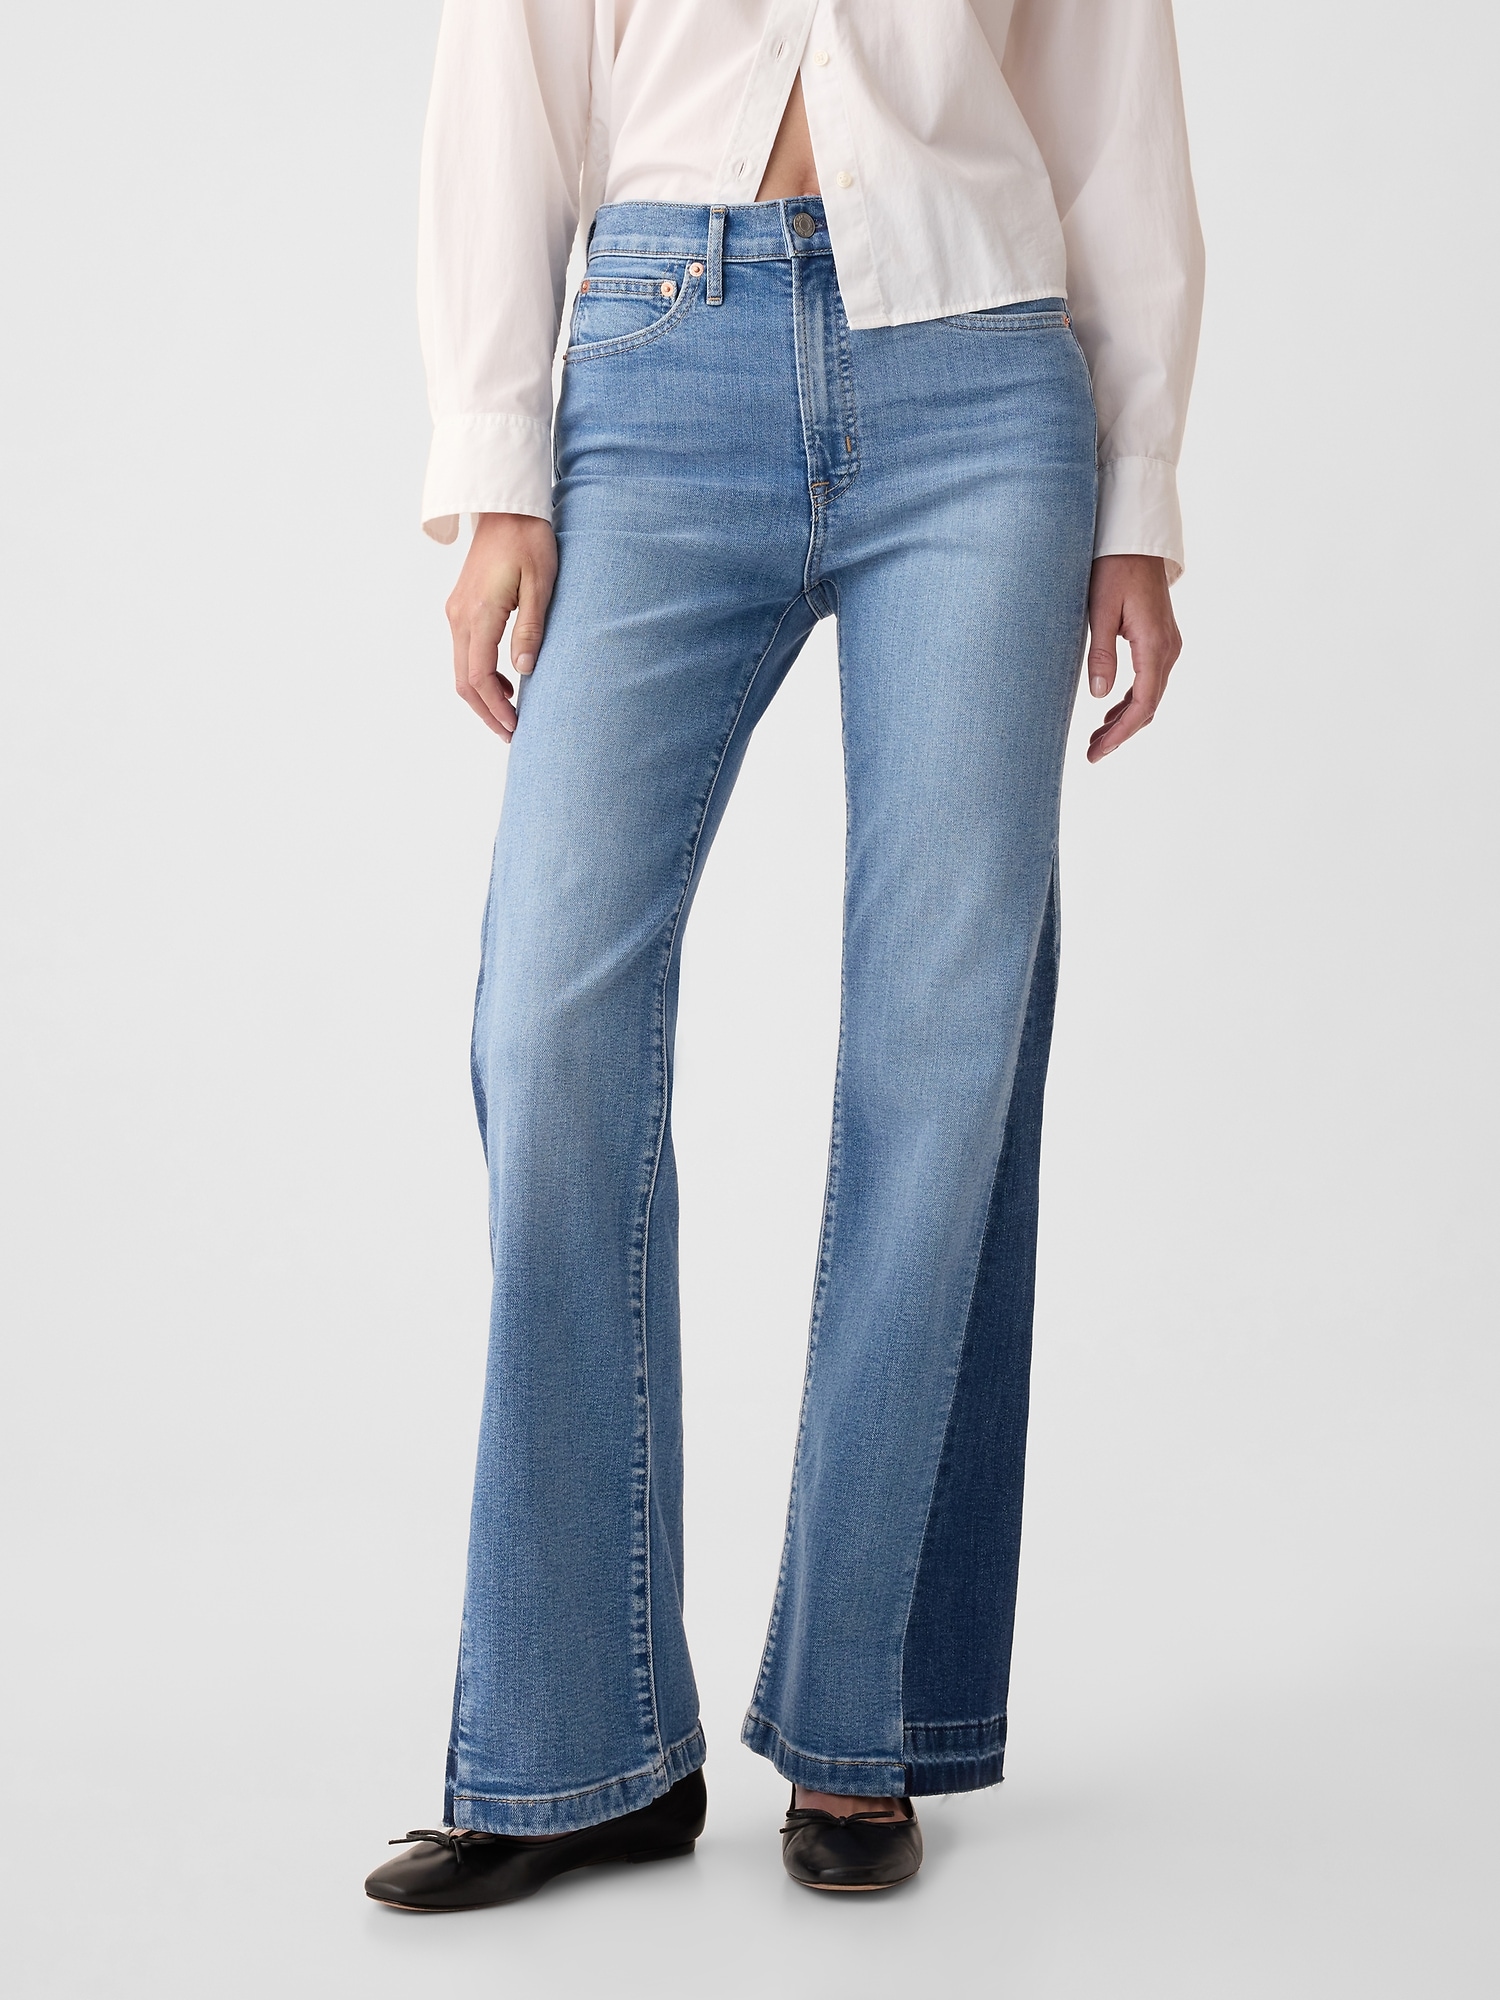 Buy Gap Light Wash Blue High Waisted 70's Flared Jeans from the